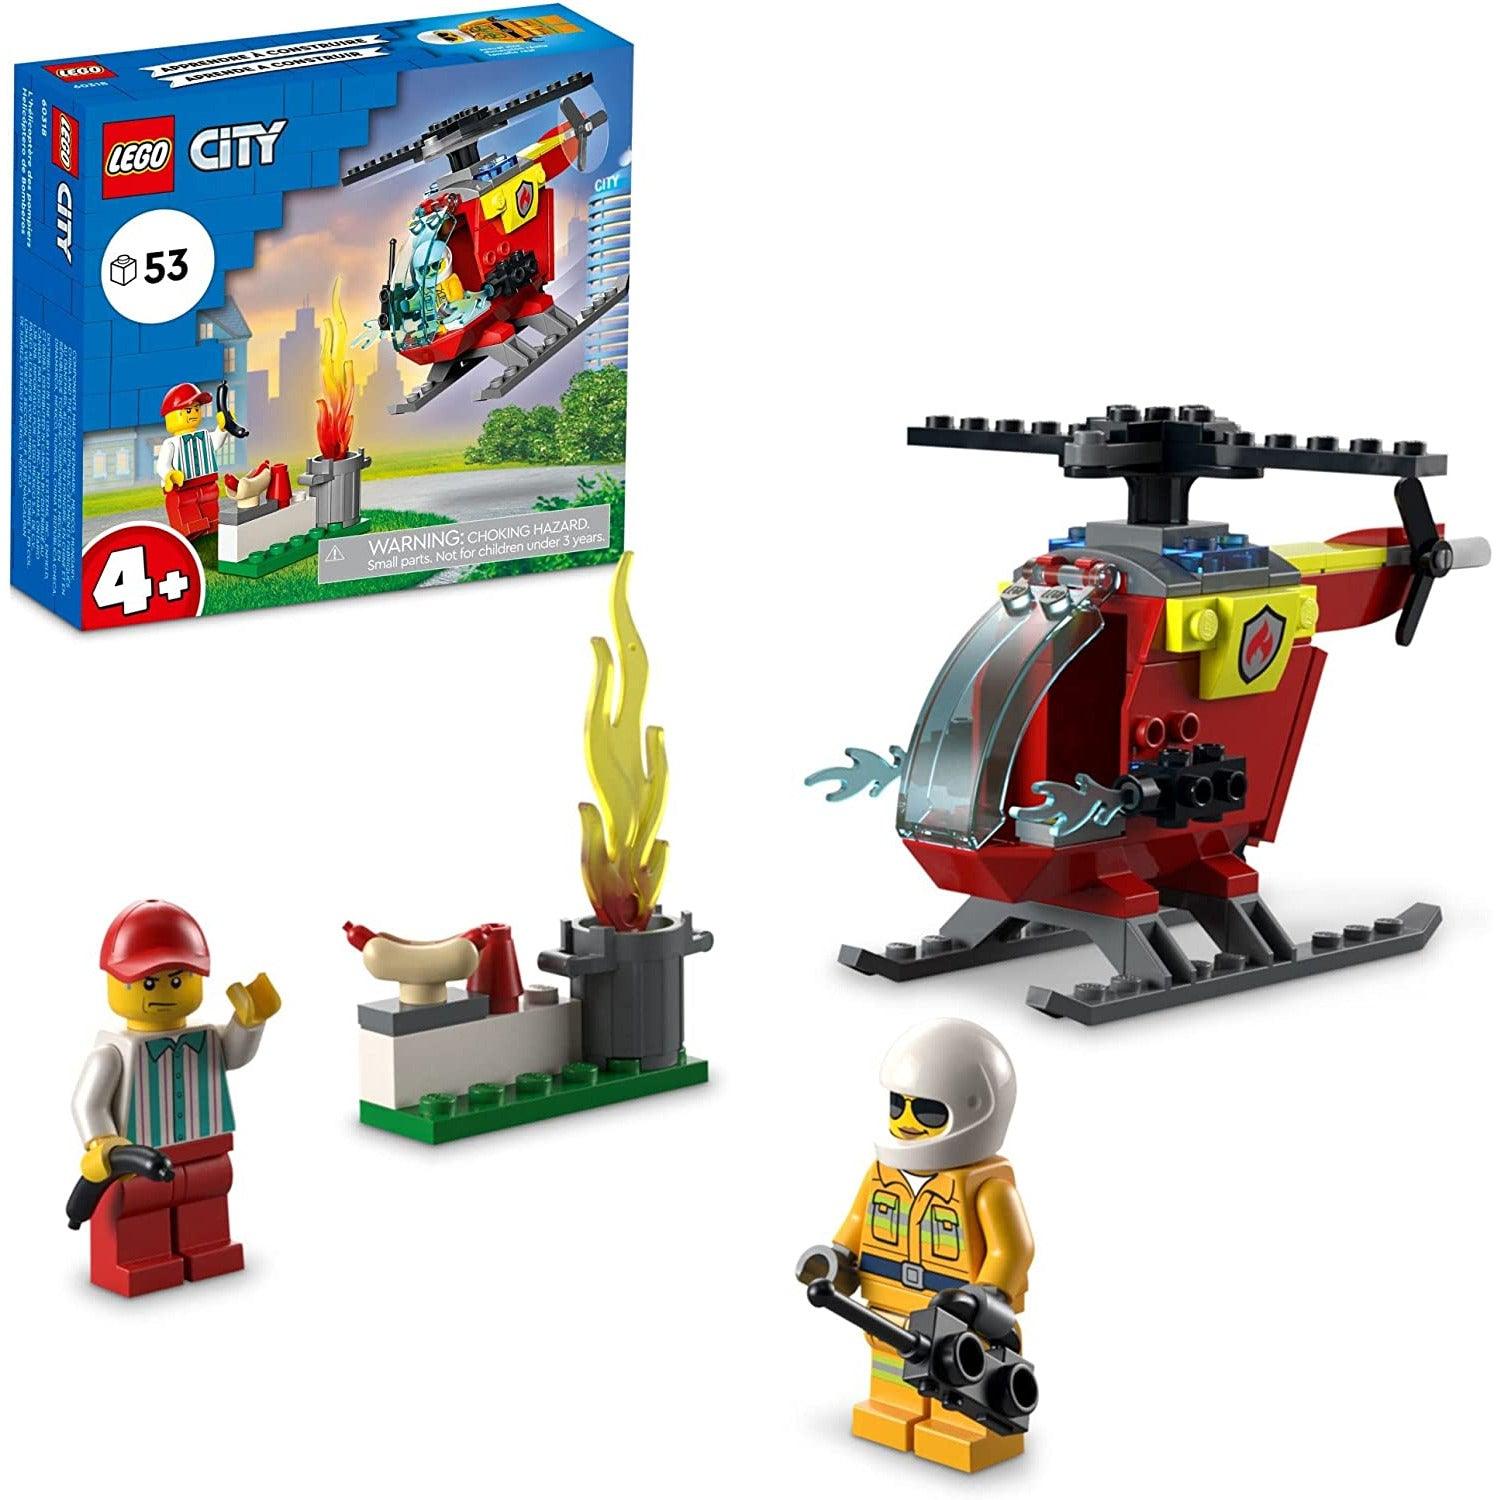 LEGO City Fire Helicopter 60318 Building Toy Set for Preschool Kids, Boys, and Girls Ages 4+ (53 Pieces) - BumbleToys - 5-7 Years, Boys, City, EXO, LEGO